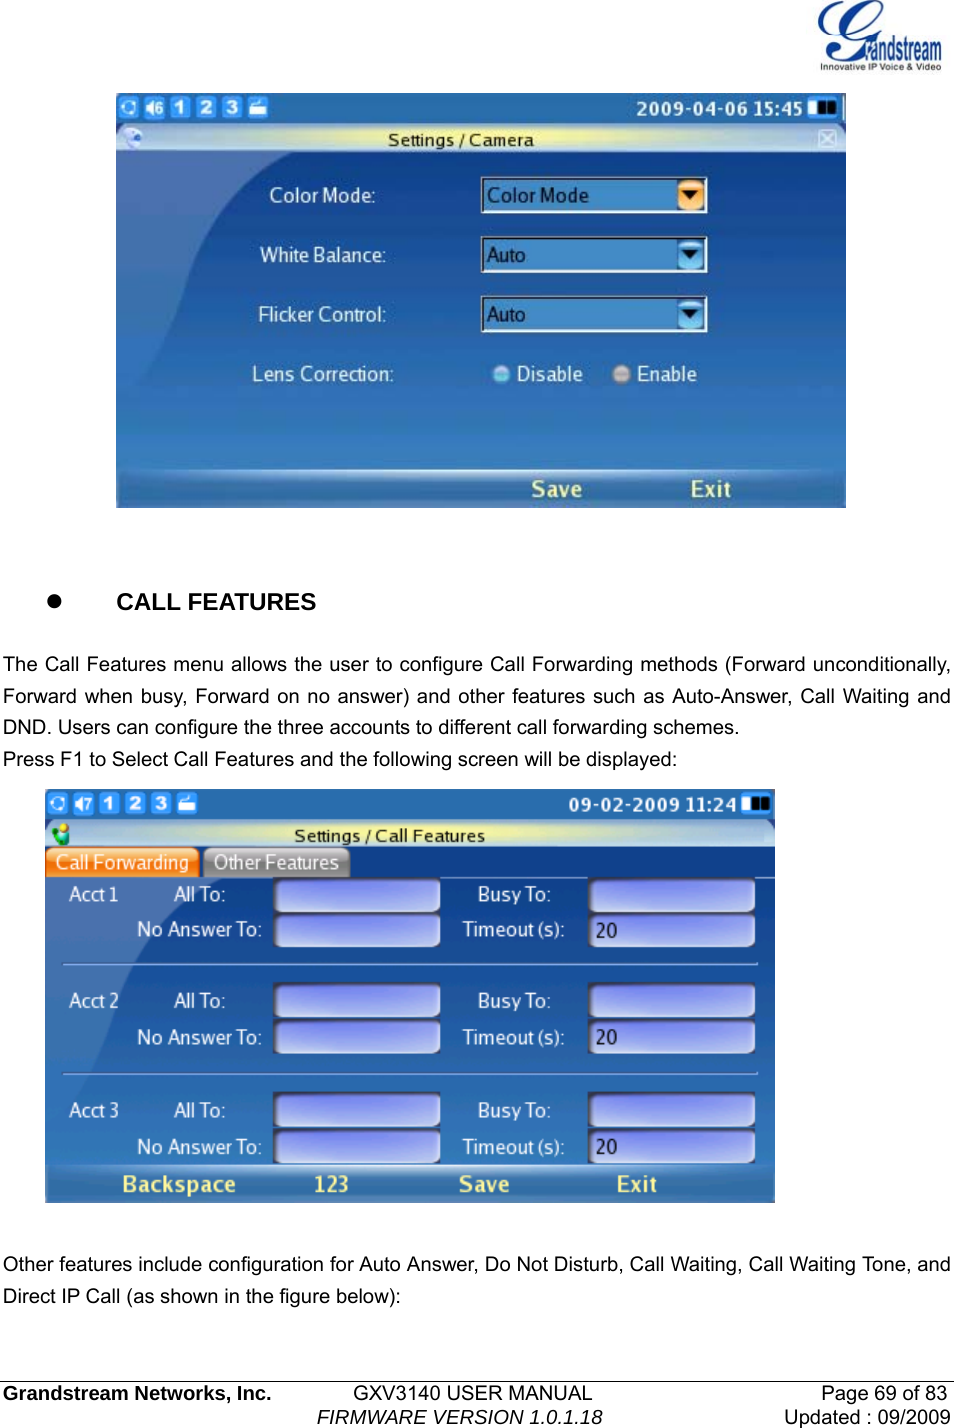   Grandstream Networks, Inc.        GXV3140 USER MANUAL                       Page 69 of 83                                FIRMWARE VERSION 1.0.1.18 Updated : 09/2009     z CALL FEATURES  The Call Features menu allows the user to configure Call Forwarding methods (Forward unconditionally, Forward when busy, Forward on no answer) and other features such as Auto-Answer, Call Waiting and DND. Users can configure the three accounts to different call forwarding schemes.                         Press F1 to Select Call Features and the following screen will be displayed:   Other features include configuration for Auto Answer, Do Not Disturb, Call Waiting, Call Waiting Tone, and Direct IP Call (as shown in the figure below): 